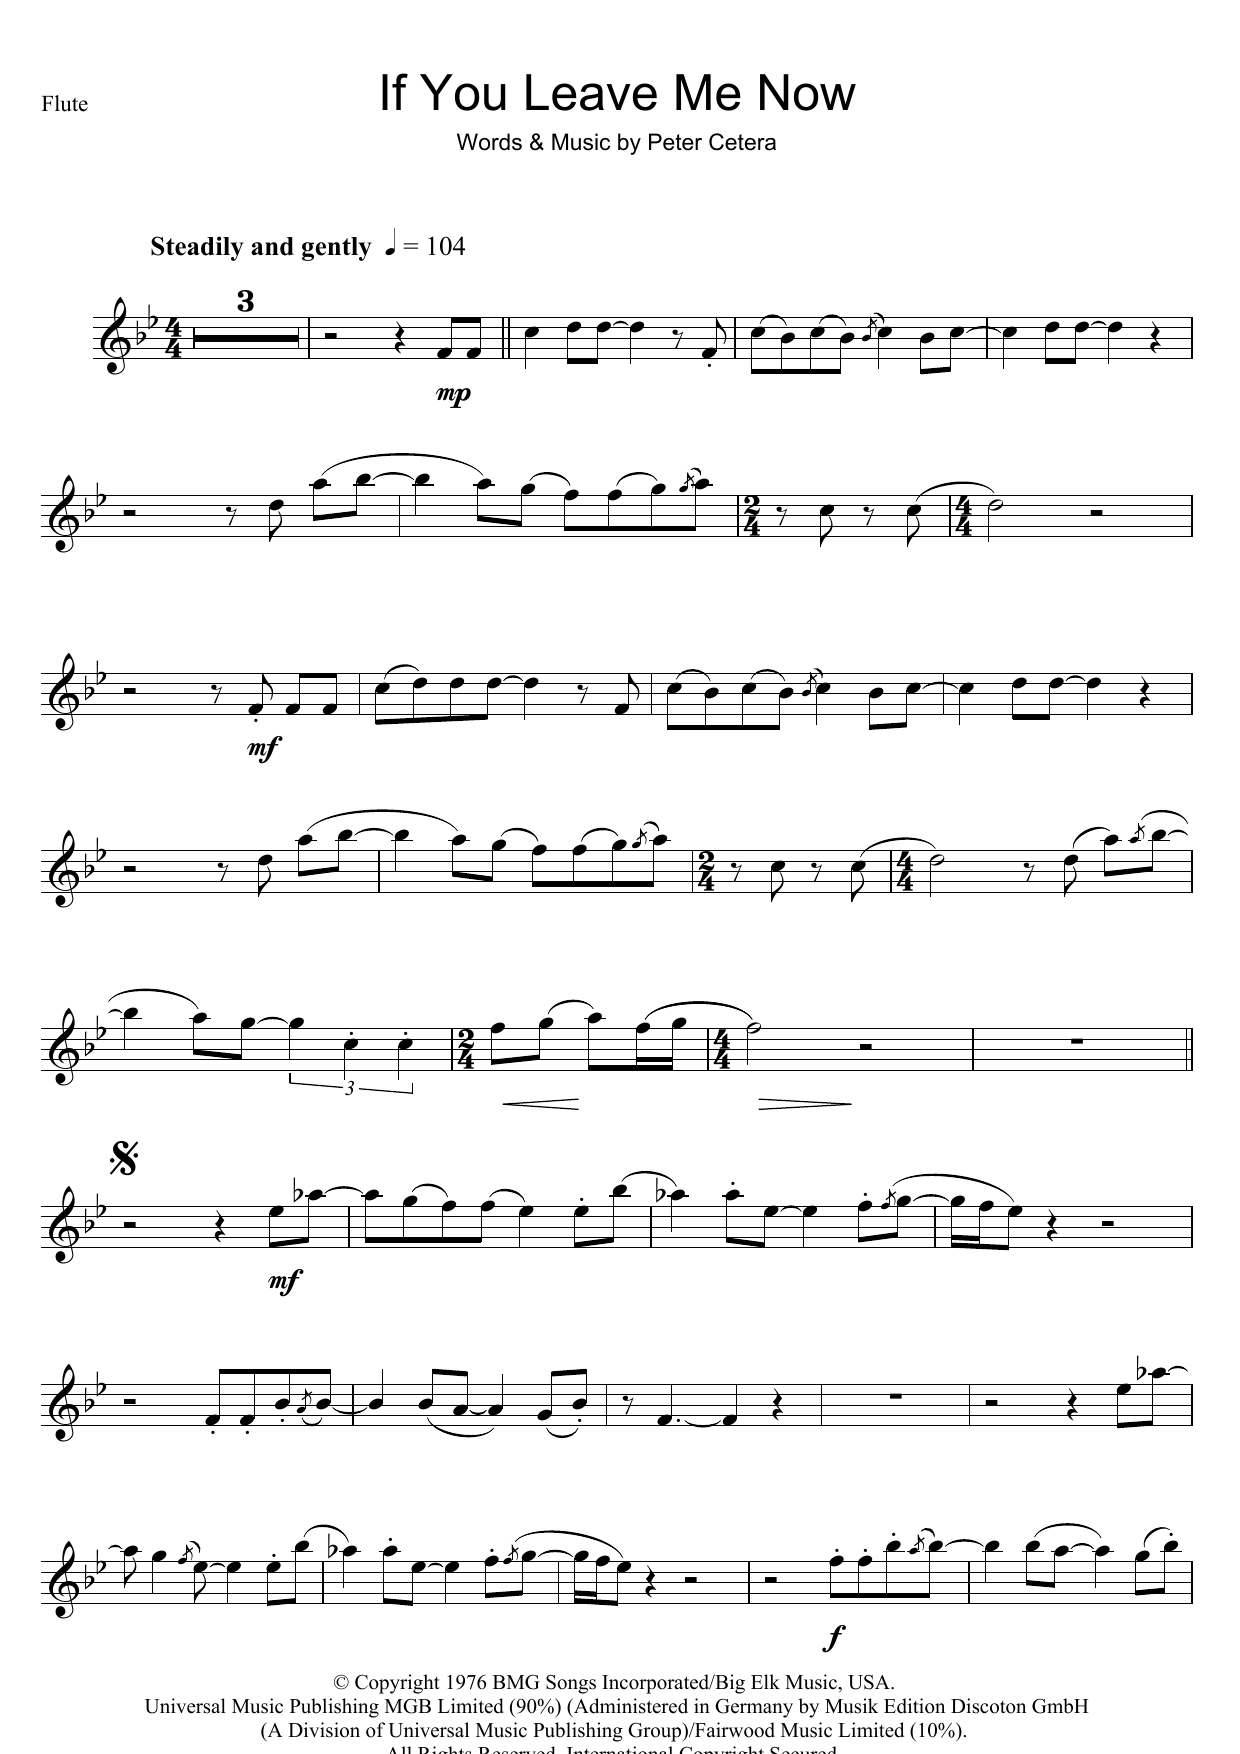 Download Chicago If You Leave Me Now Sheet Music